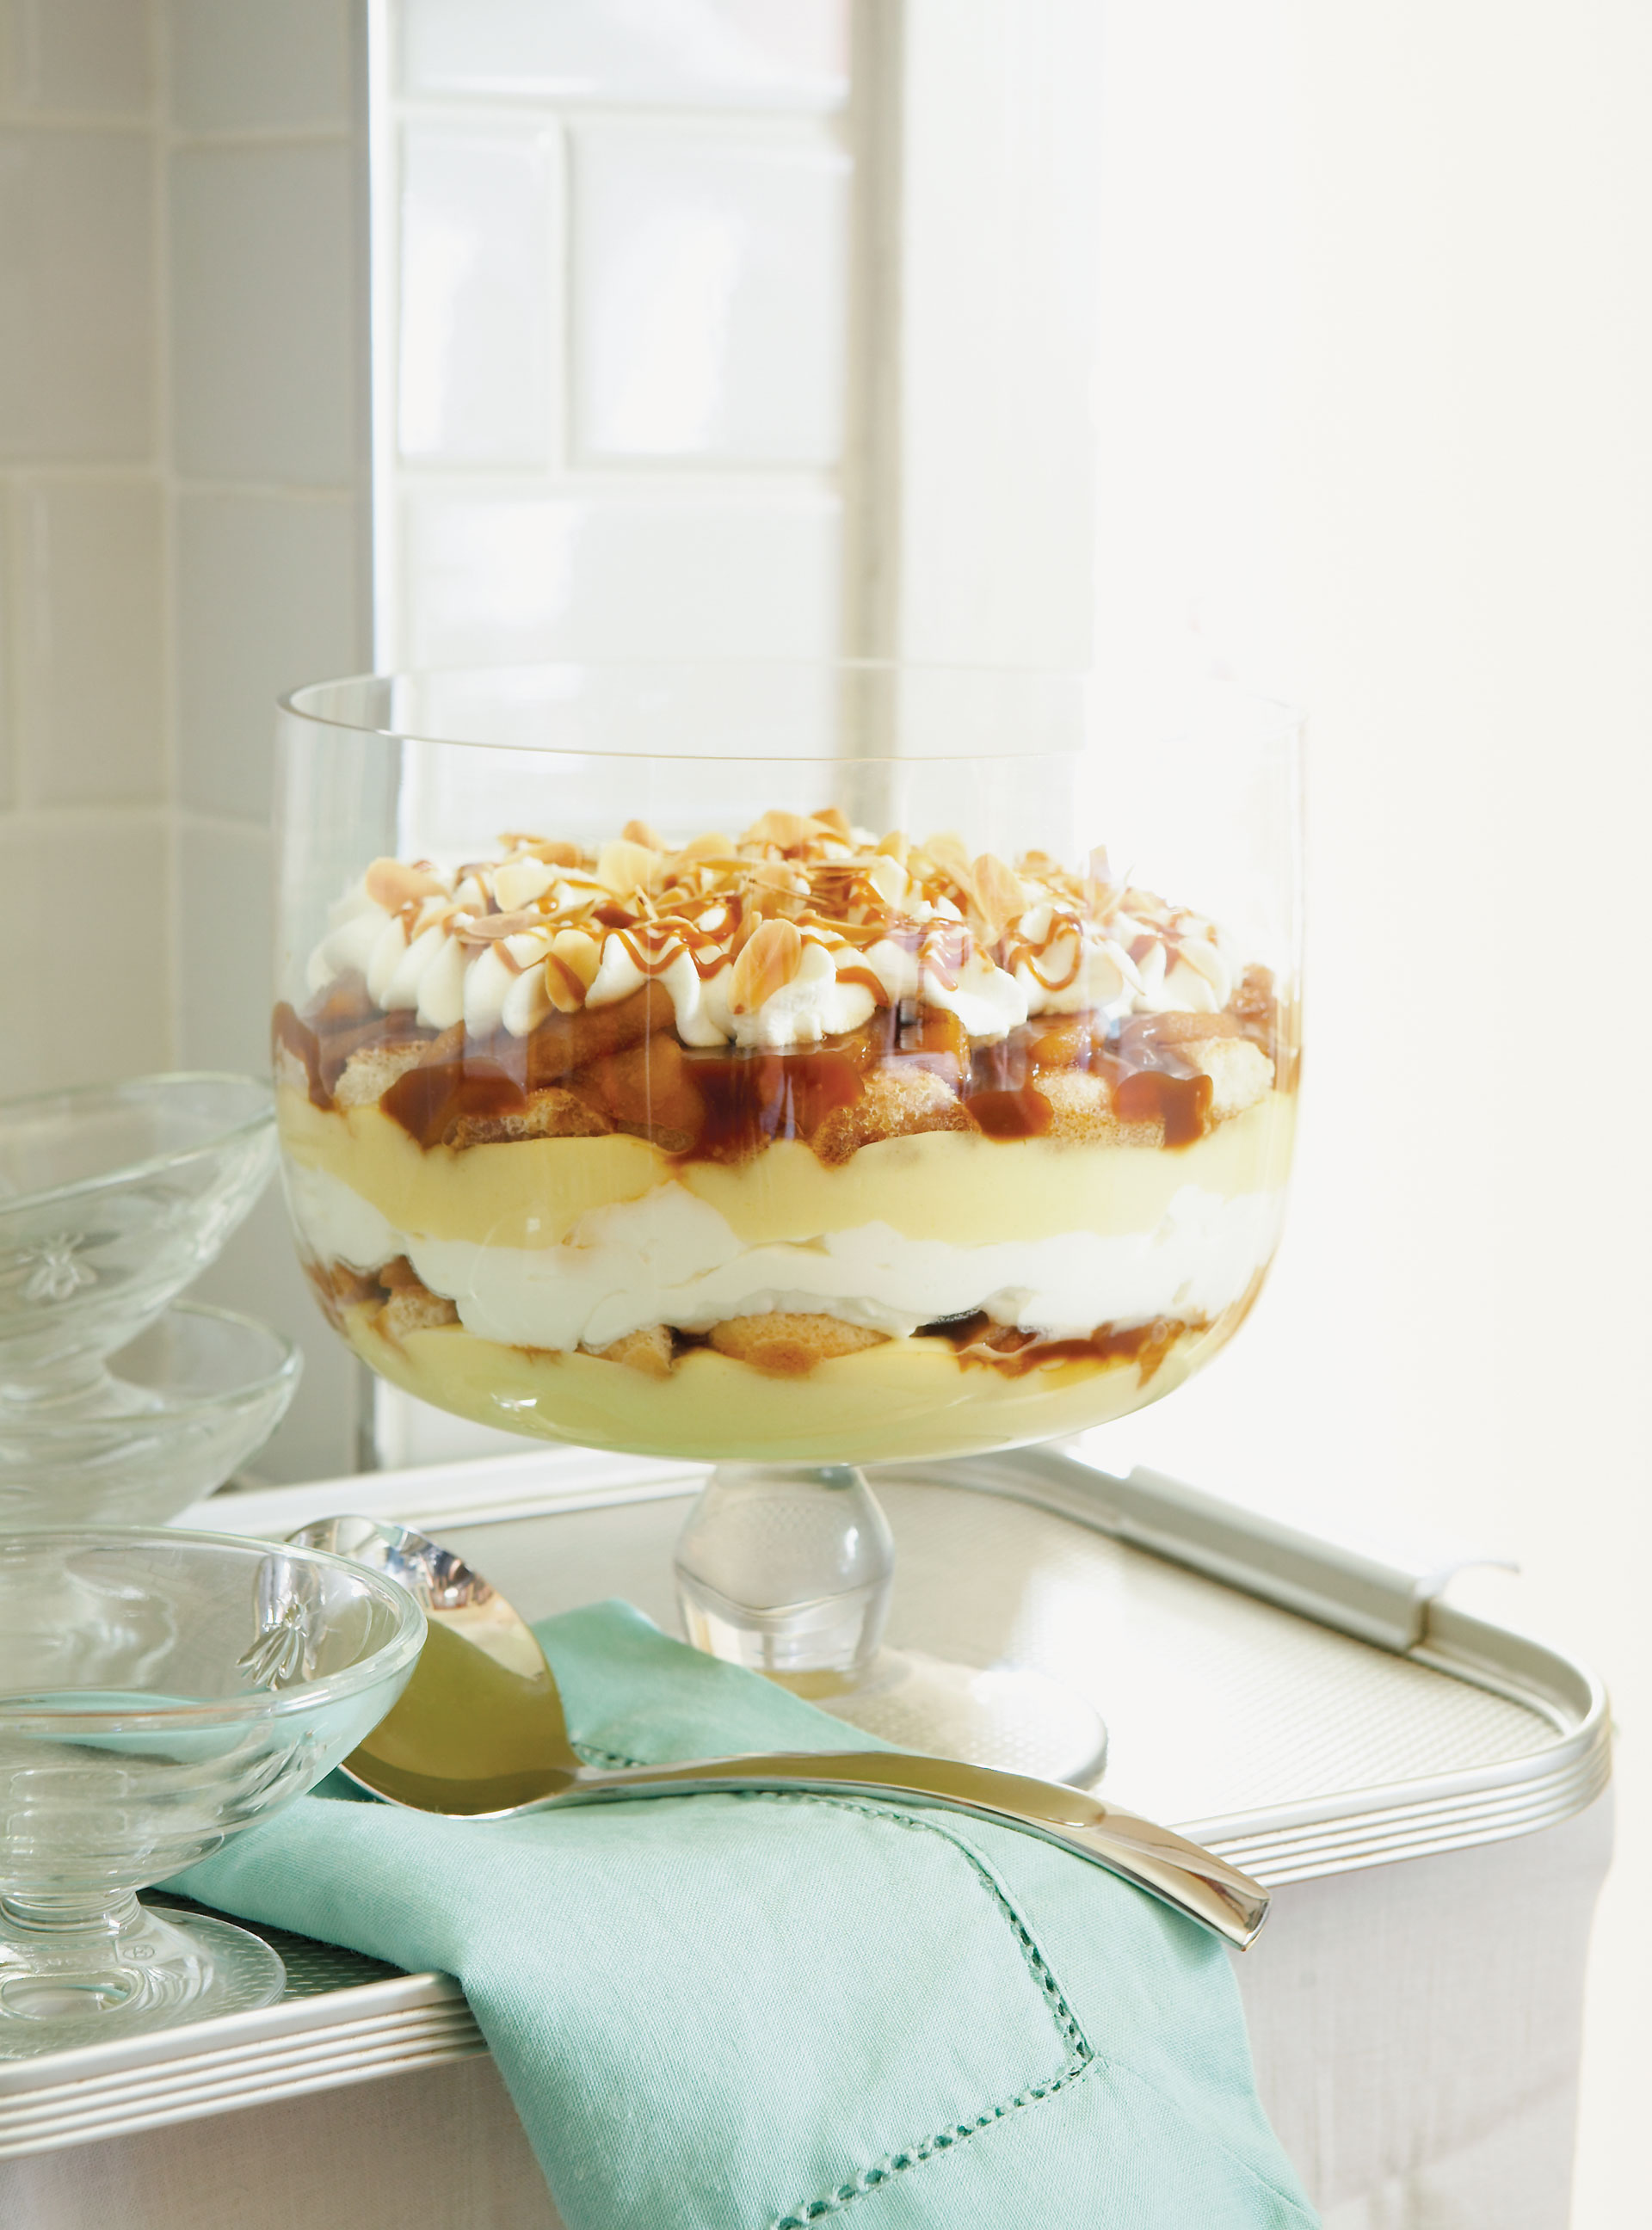 Trifle with Pears and Caramel